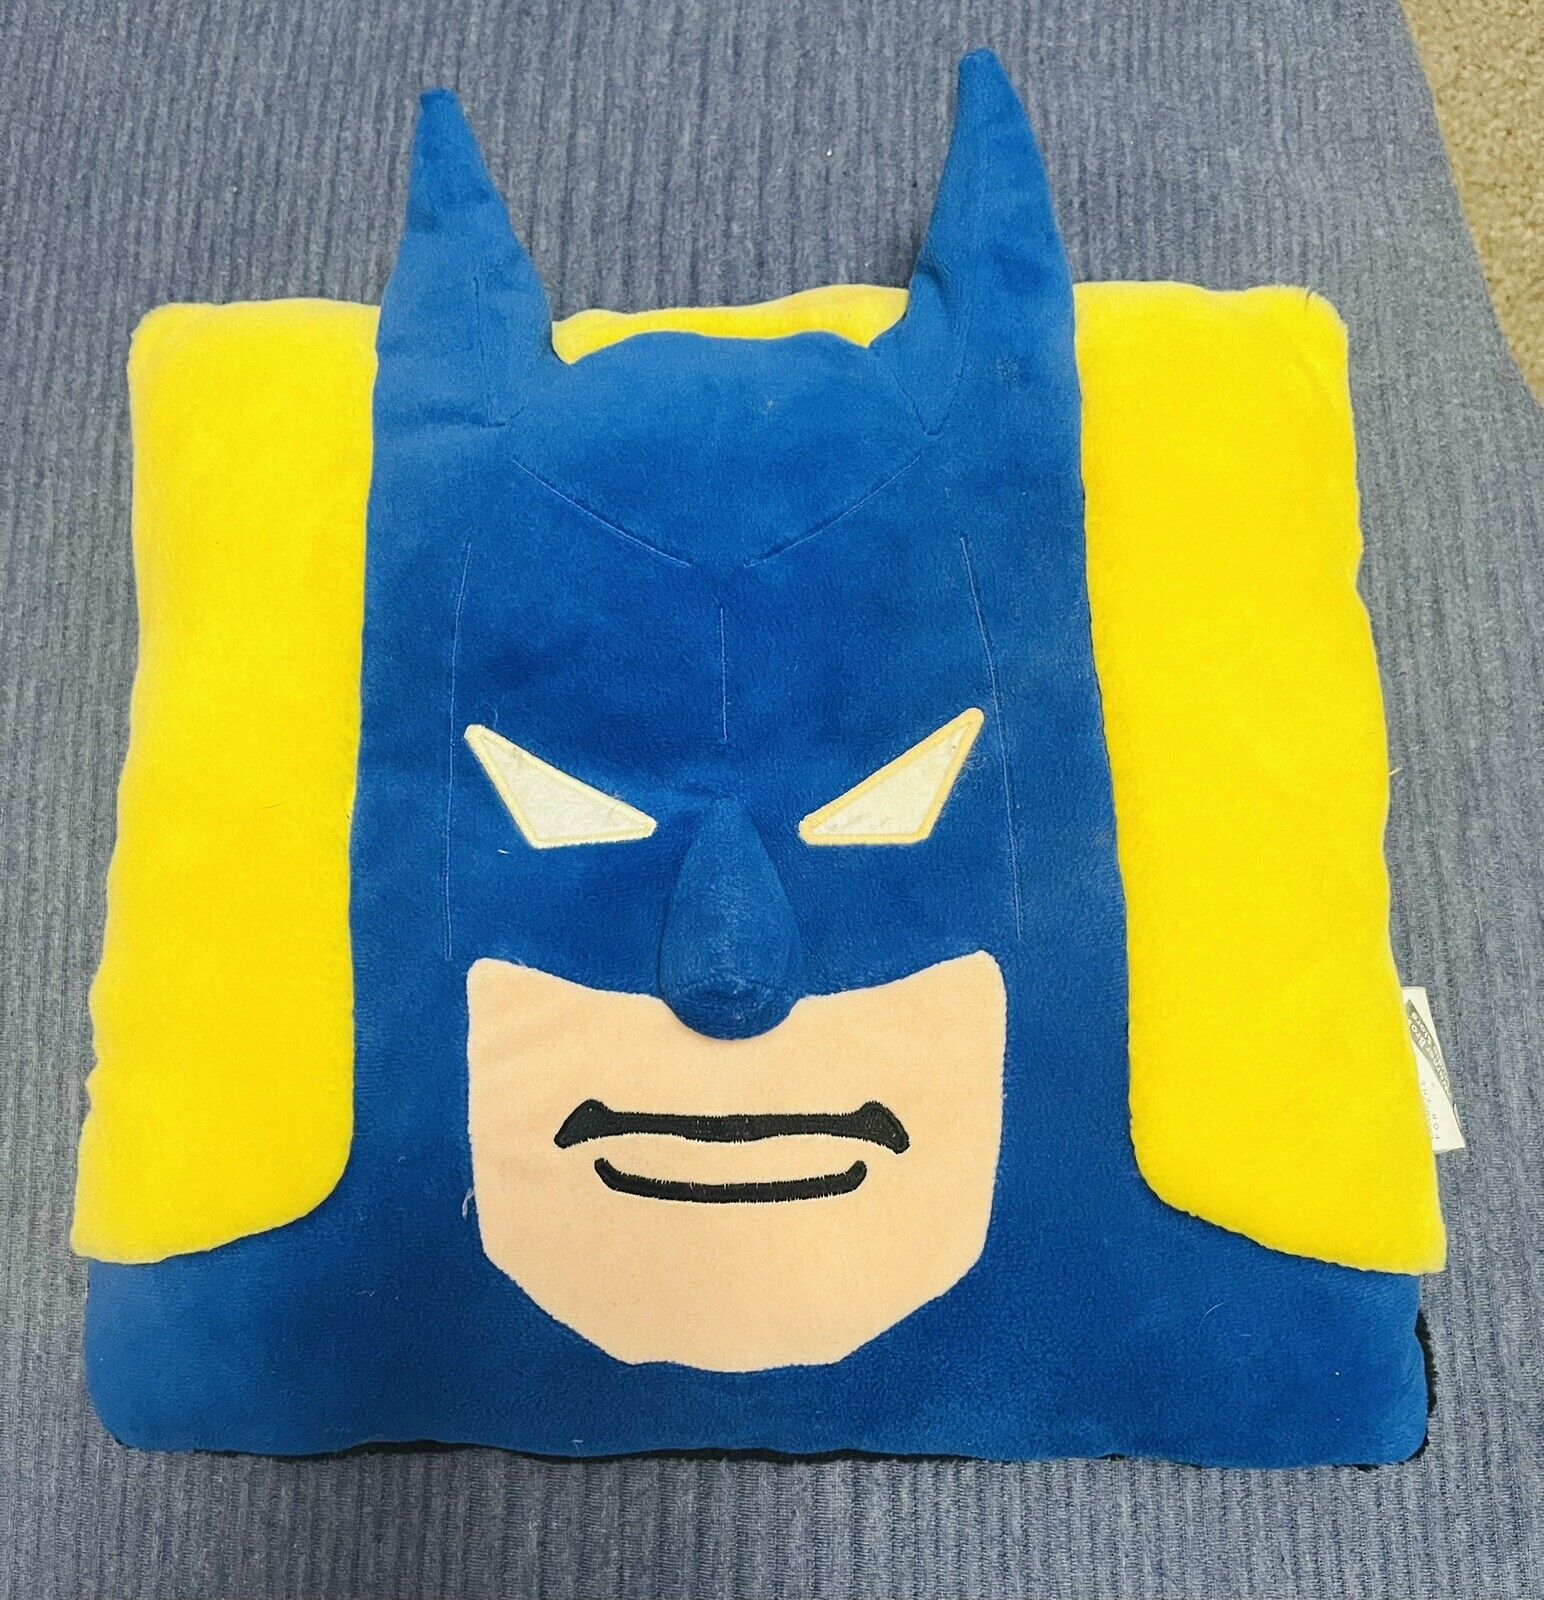 ULTRA RARE Batman Pillow WB Studios Store. 2nd Known To Exist See For Your Self